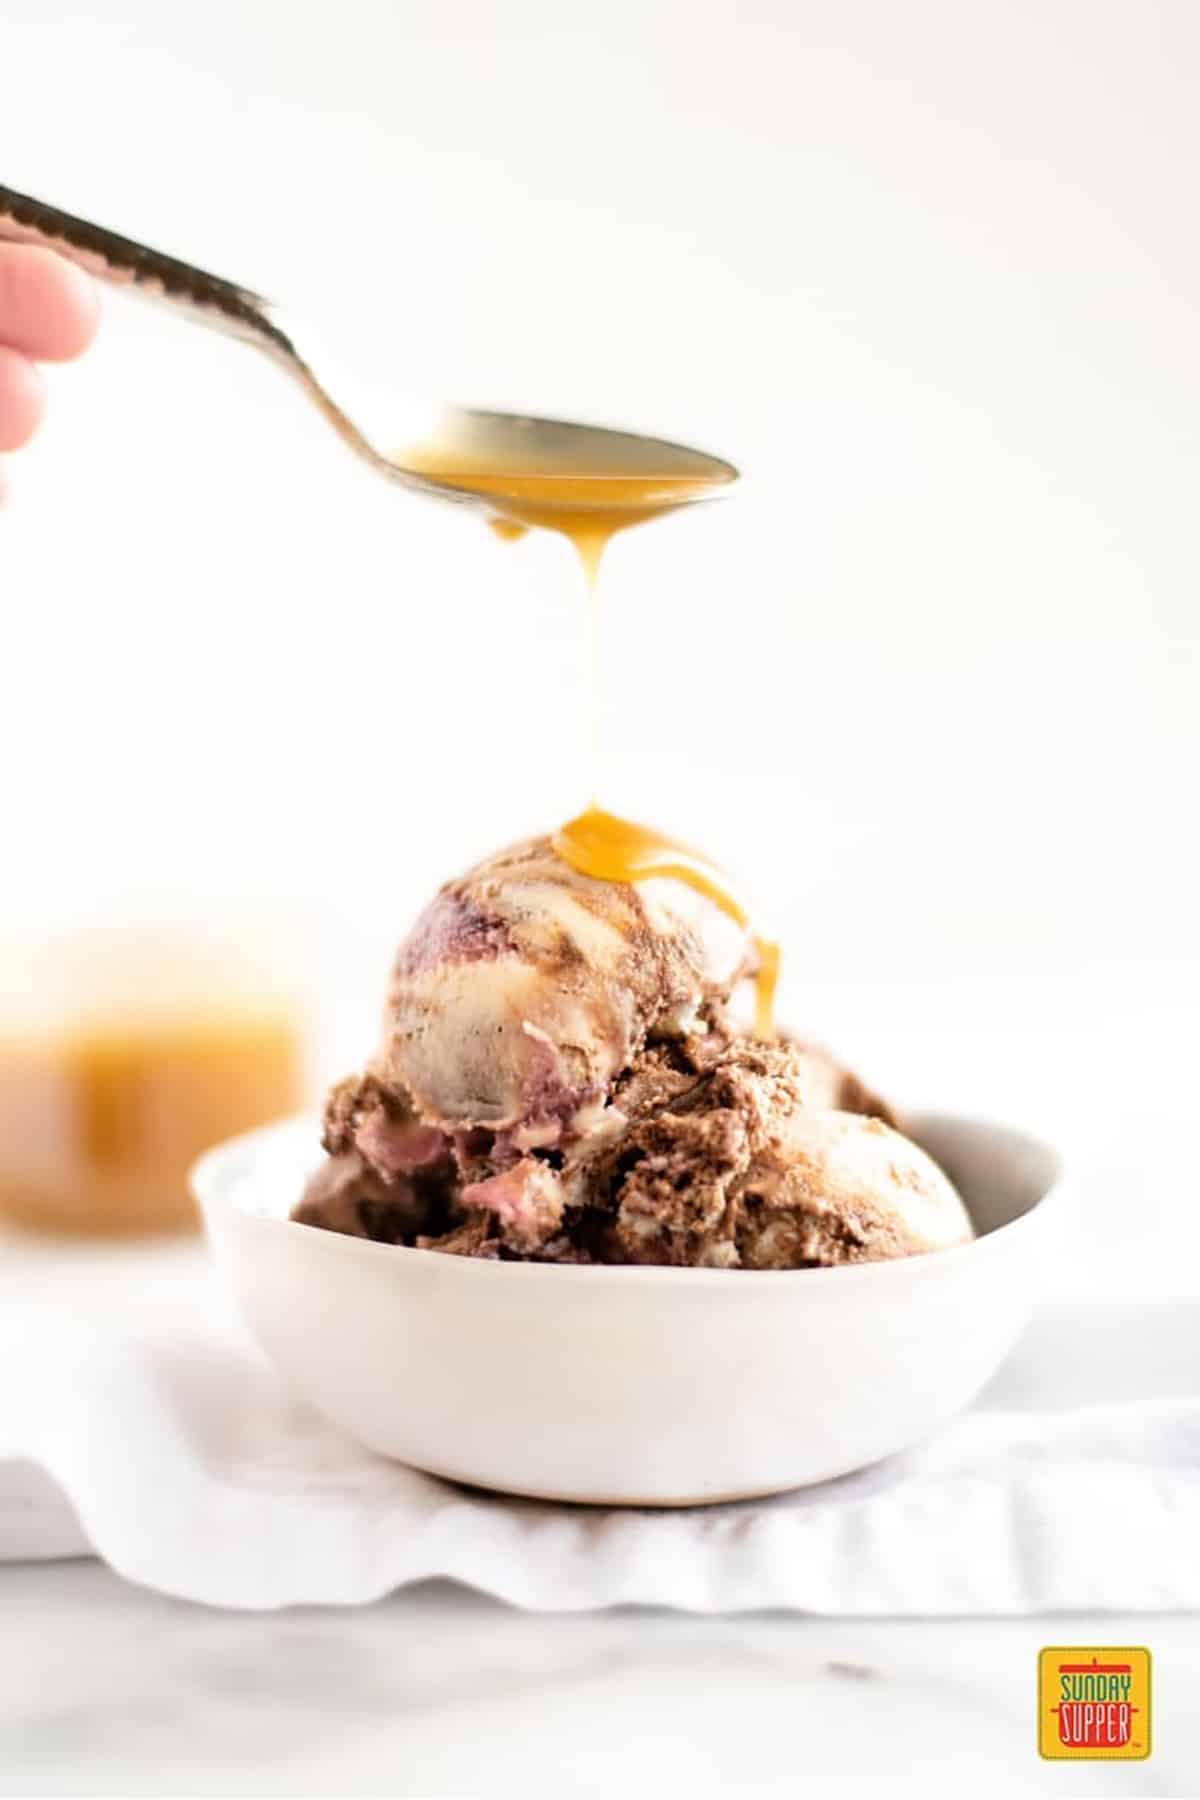 Topping ice cream with butterscotch sauce on a spoon